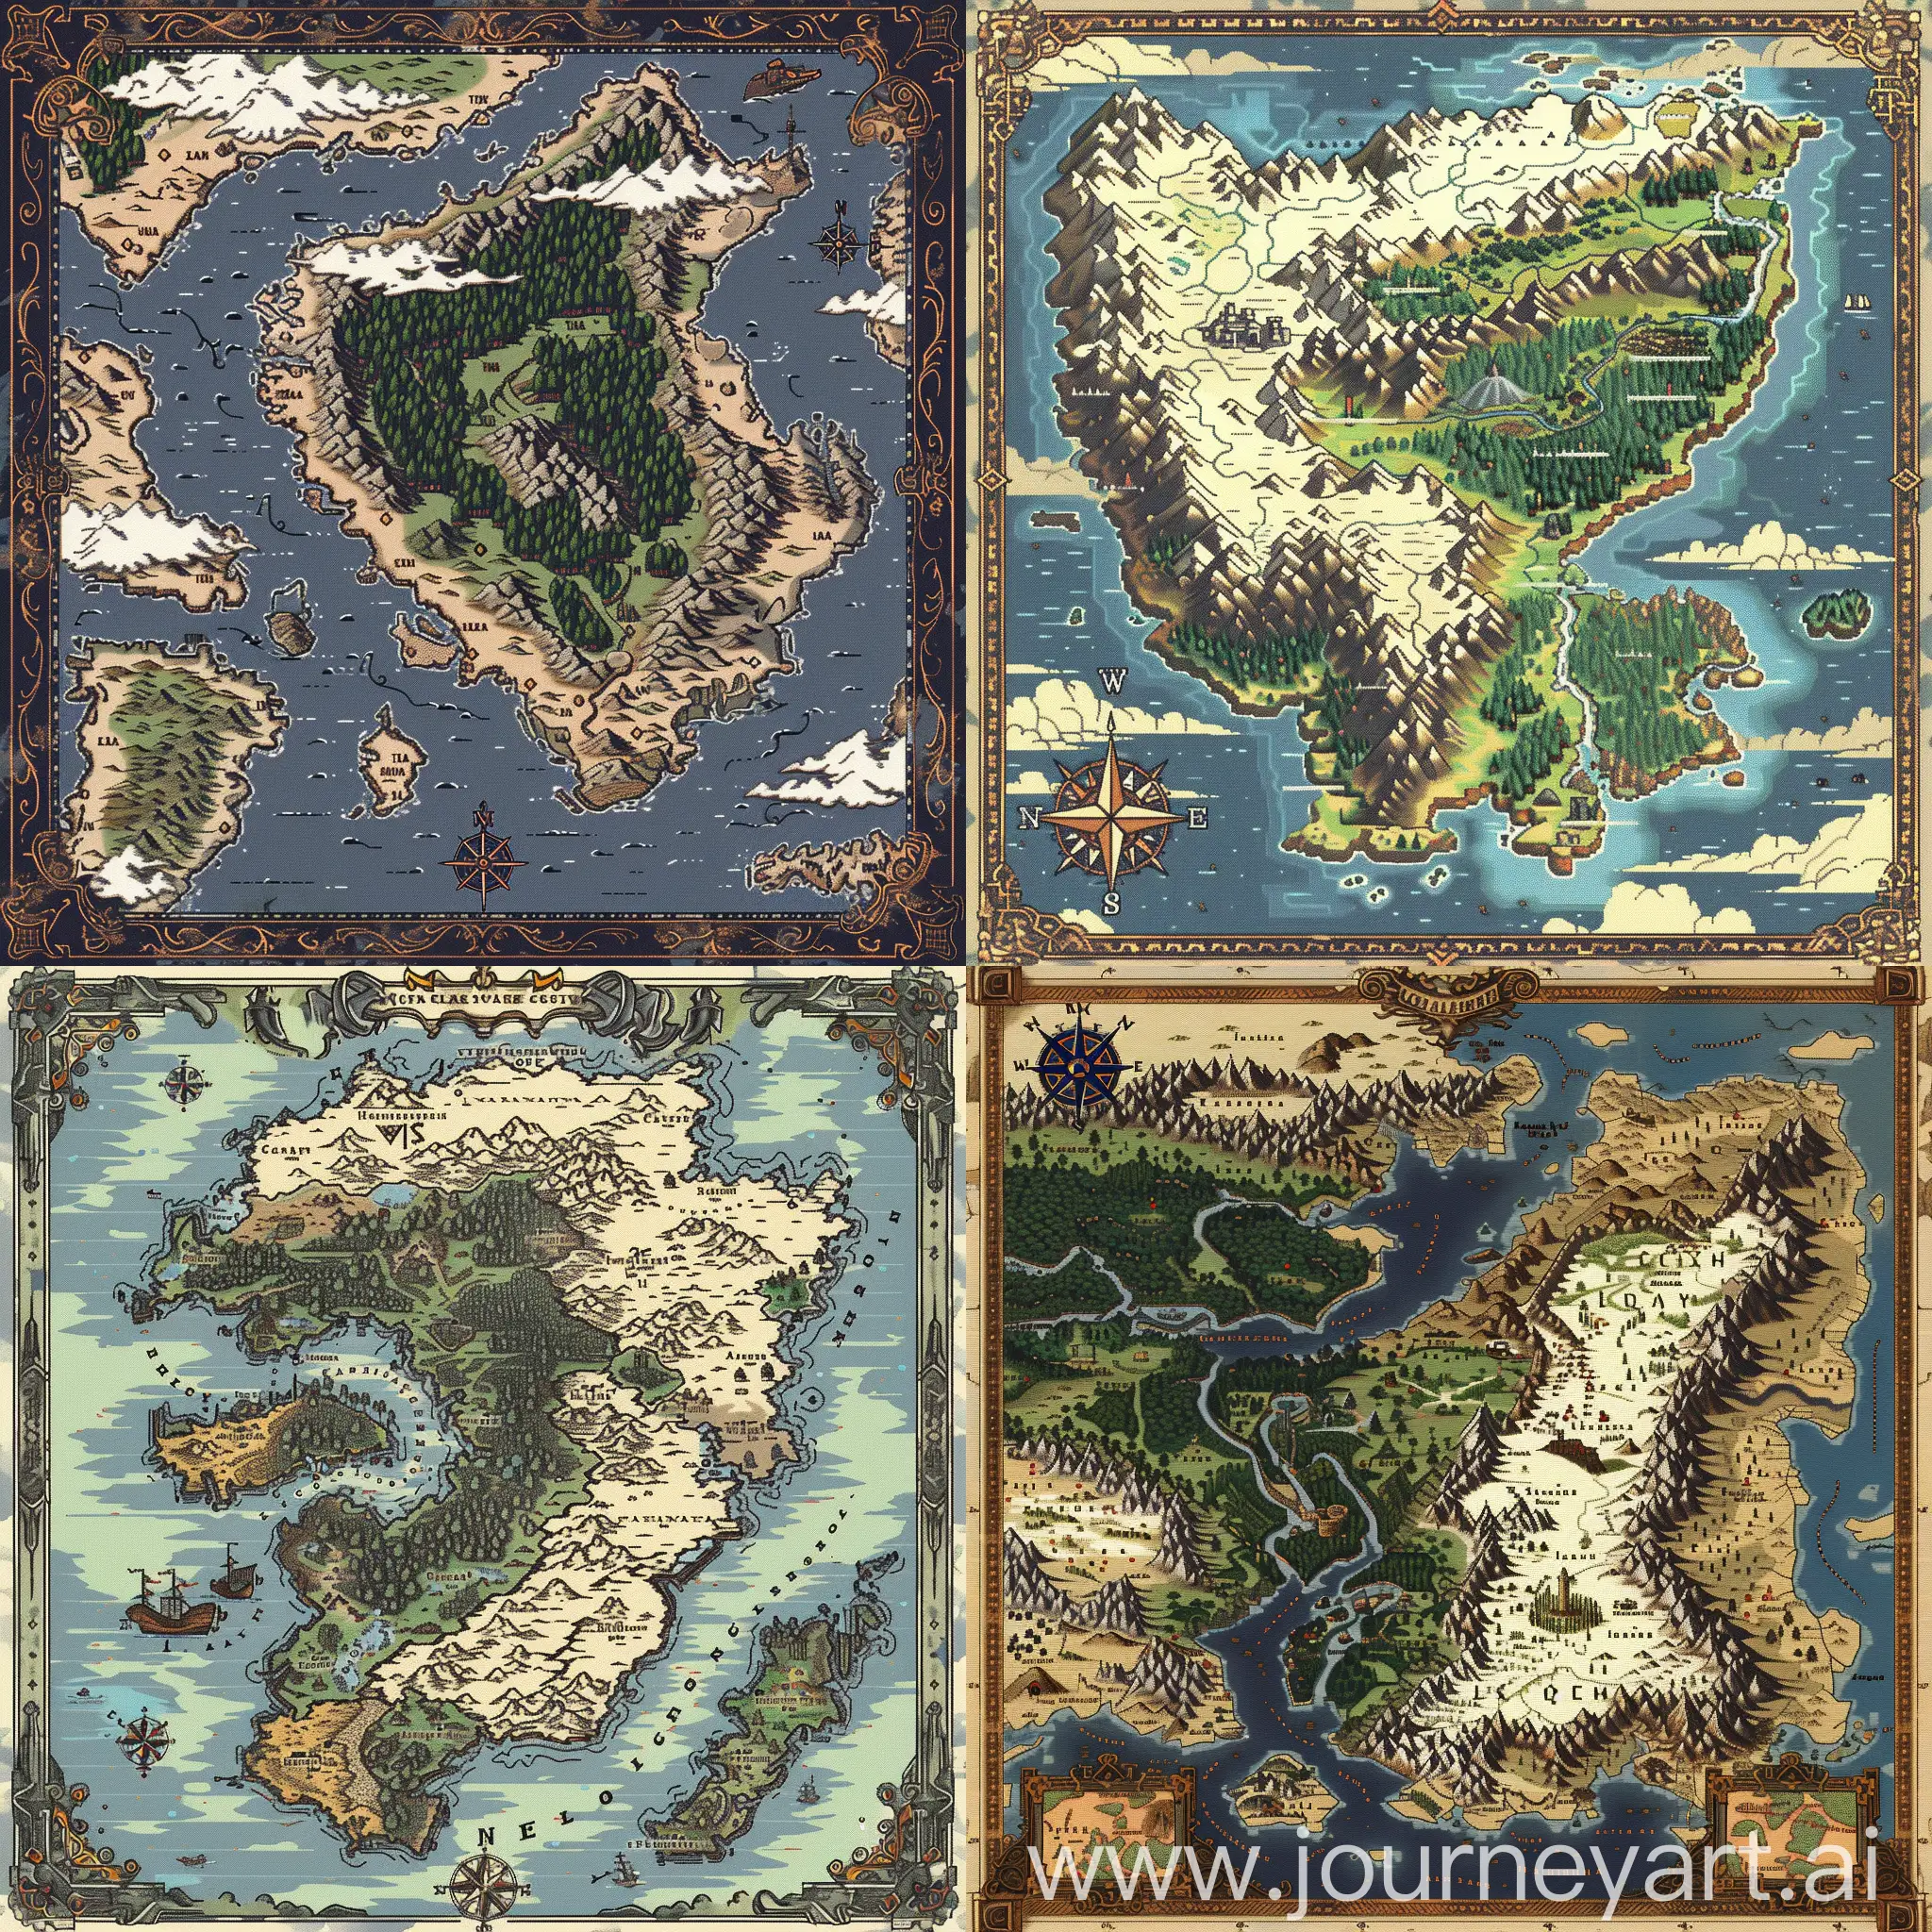 Intricate-Middle-Ages-Pixel-Art-Map-of-Island-Continent-with-Varied-Terrain-and-Decorative-Details